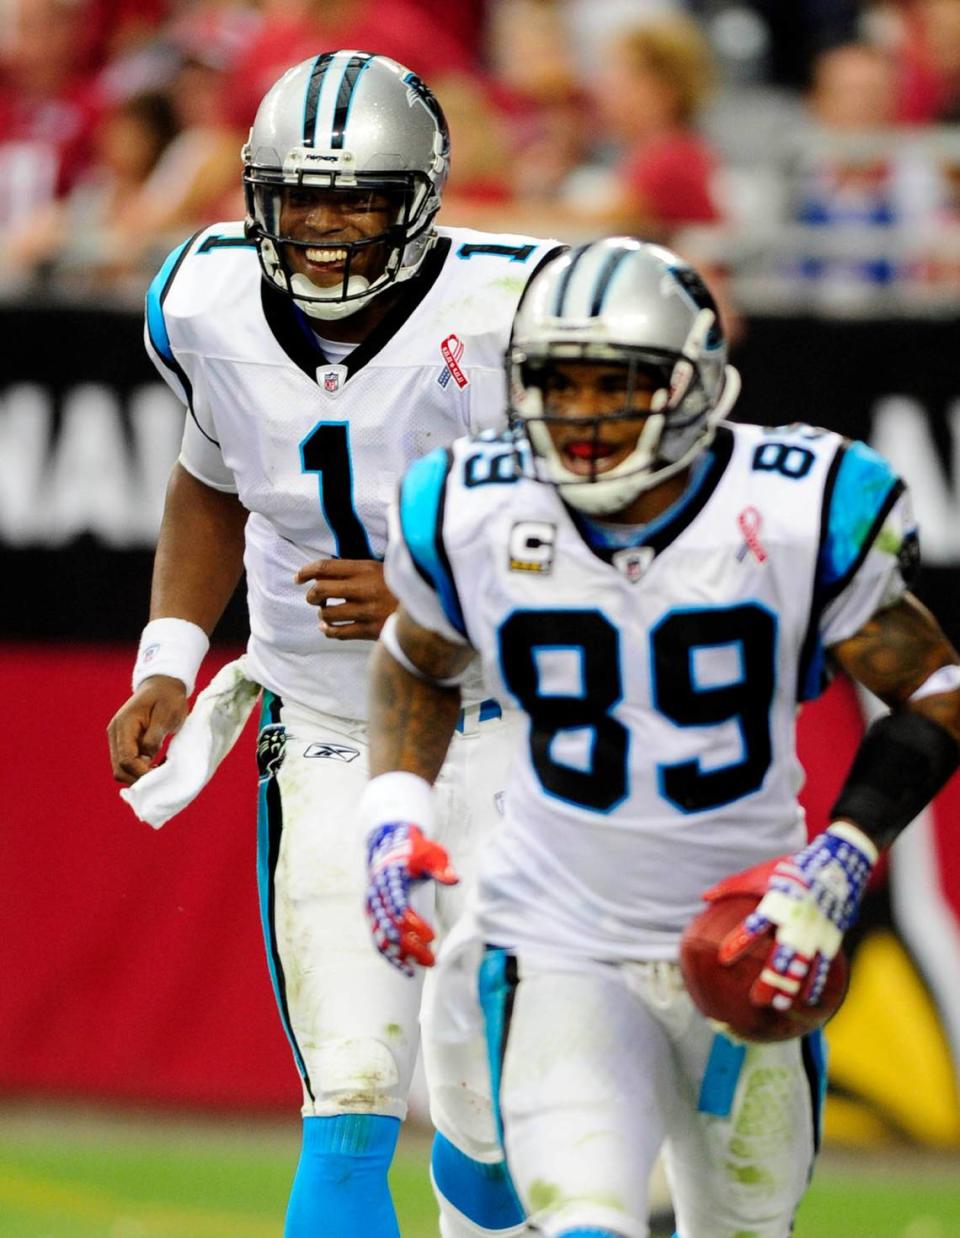 Carolina Panthers’ Cam Newton (1) smiles as he and Steve Smith (89) celebrate their second touchdown pass against the Arizona Cardinals on Sunday, September 11, 2011, at University of Phoenix Stadium. Arizona won, 28-21. Newton became the first rookie to throw for more than 400 yards in his NFL debut and threw TD passes to Smith of 75 and 26 yards. David T. Foster III-dtfoster@charlotteobserver.com